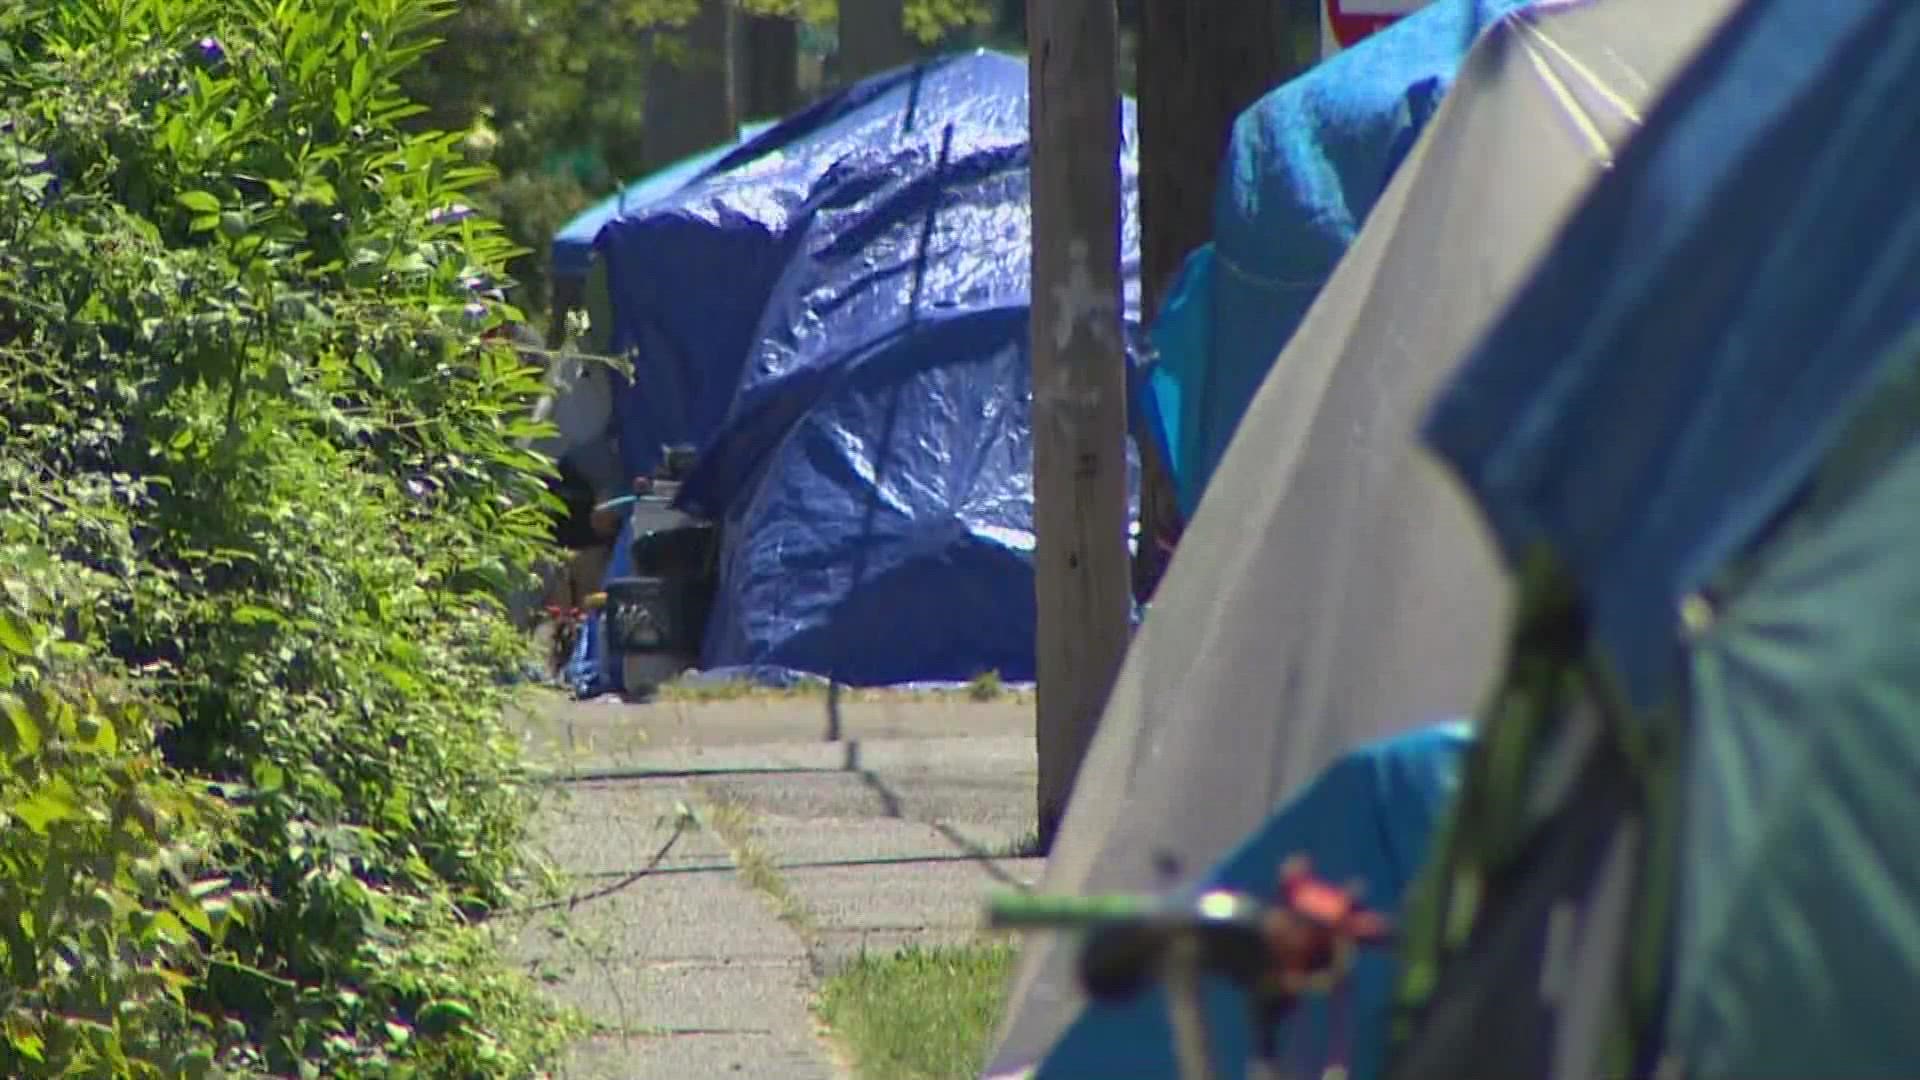 Community organizers are calling on Pierce County to make sure no one is left behind during the upcoming heatwave.